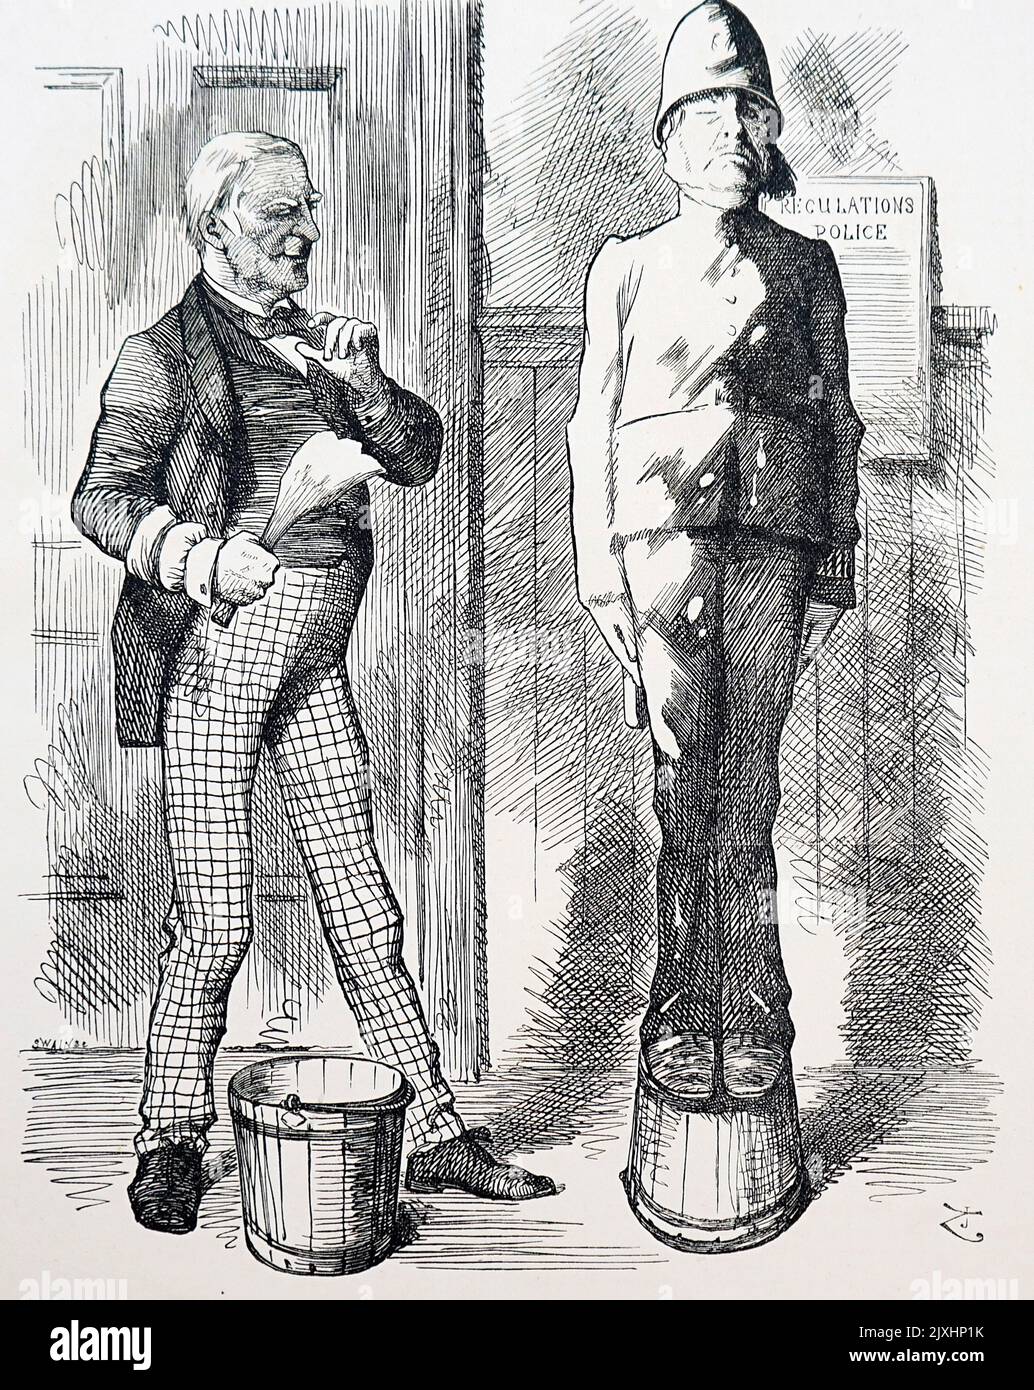 Cartoon depicting the Home Secretary, Robert Lowe (1811-1892) whitewashing a corrupt police officer, after perjury allegations. Dated 19th Century Stock Photo